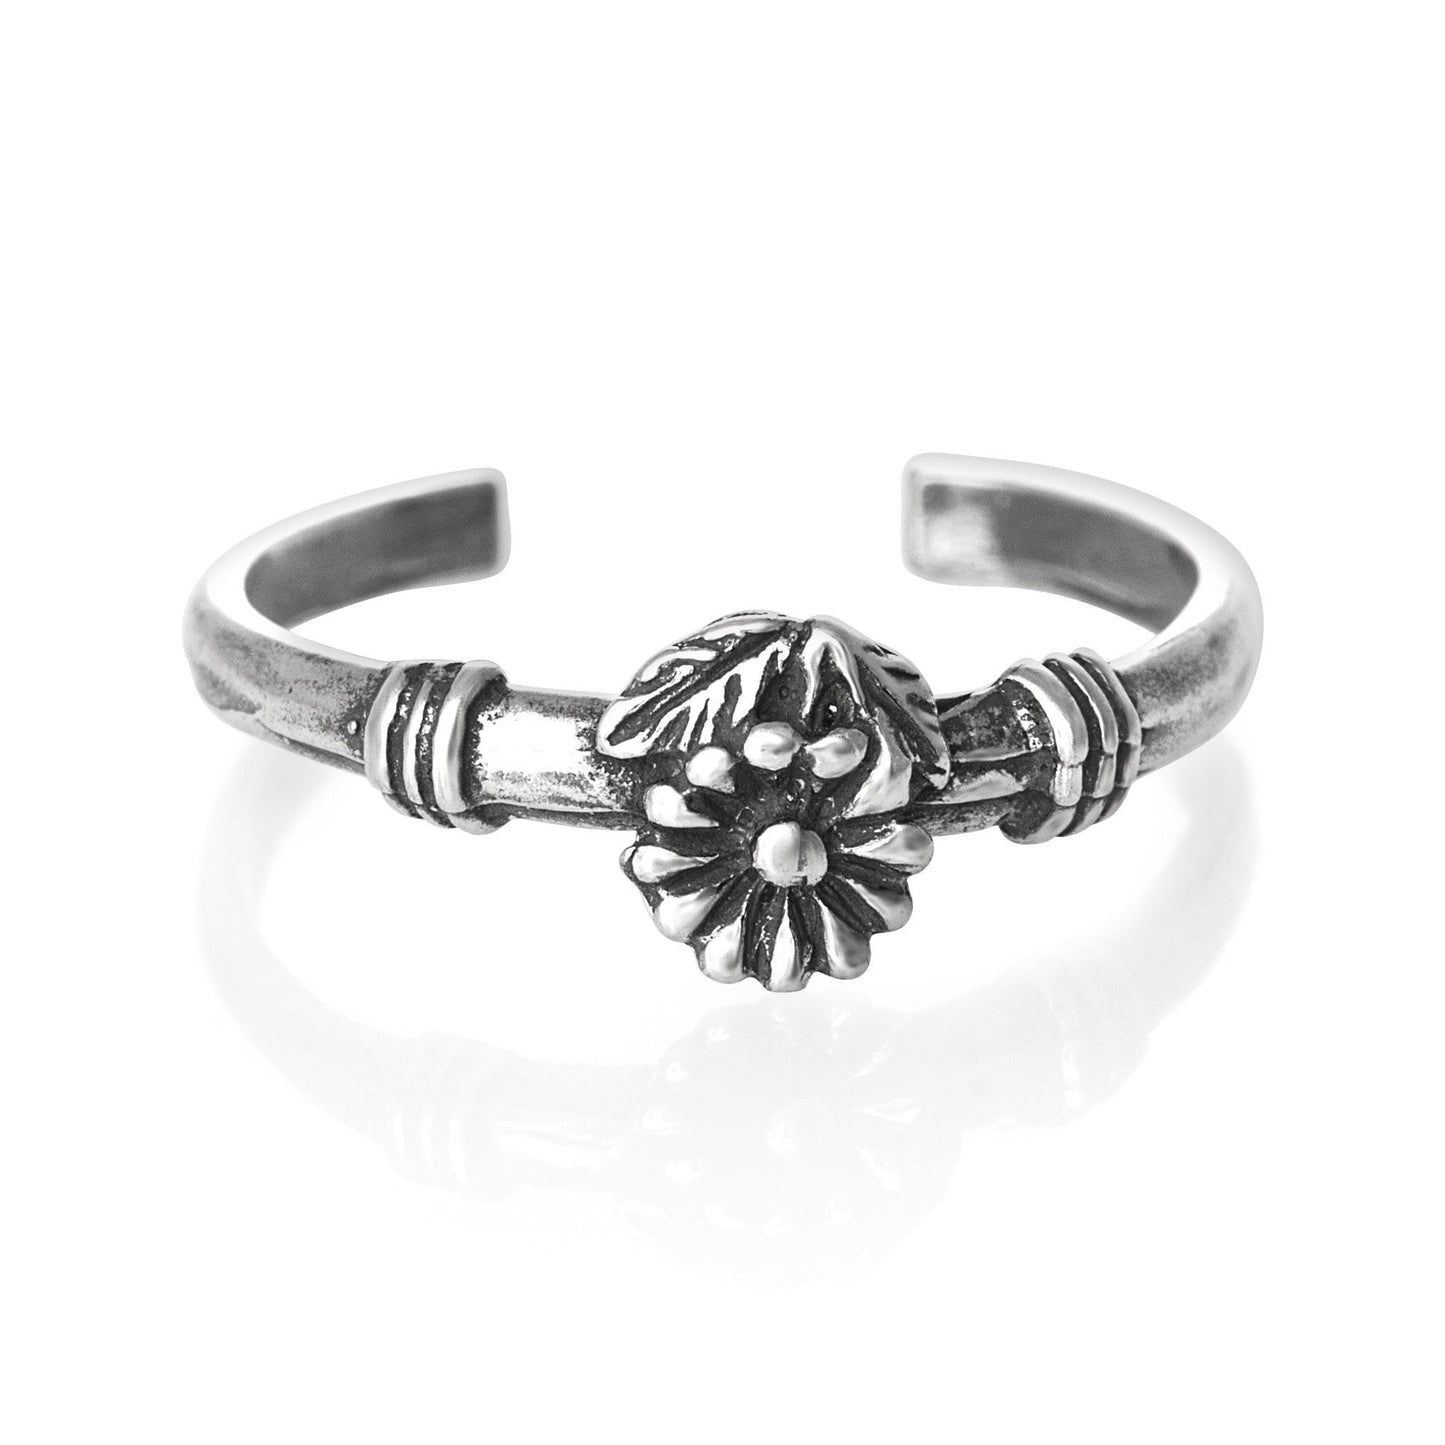 Flower Sterling Silver Toe Ring | Fashion Hut Jewelry